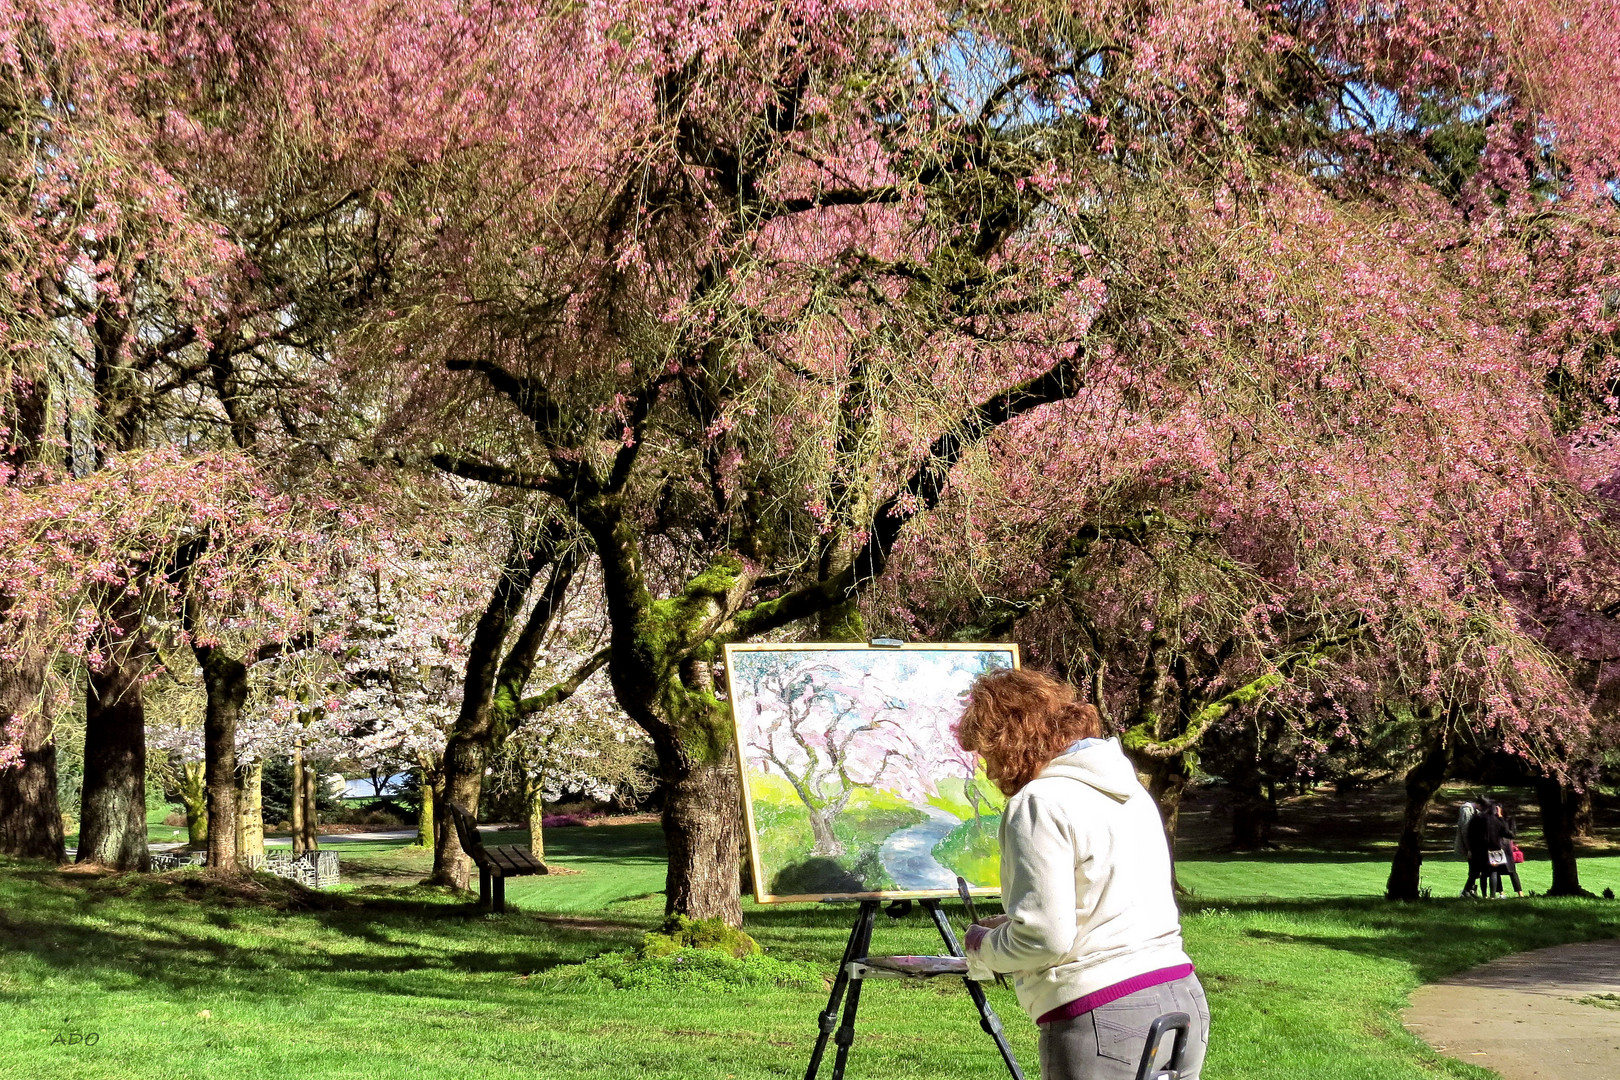 Painting Spring